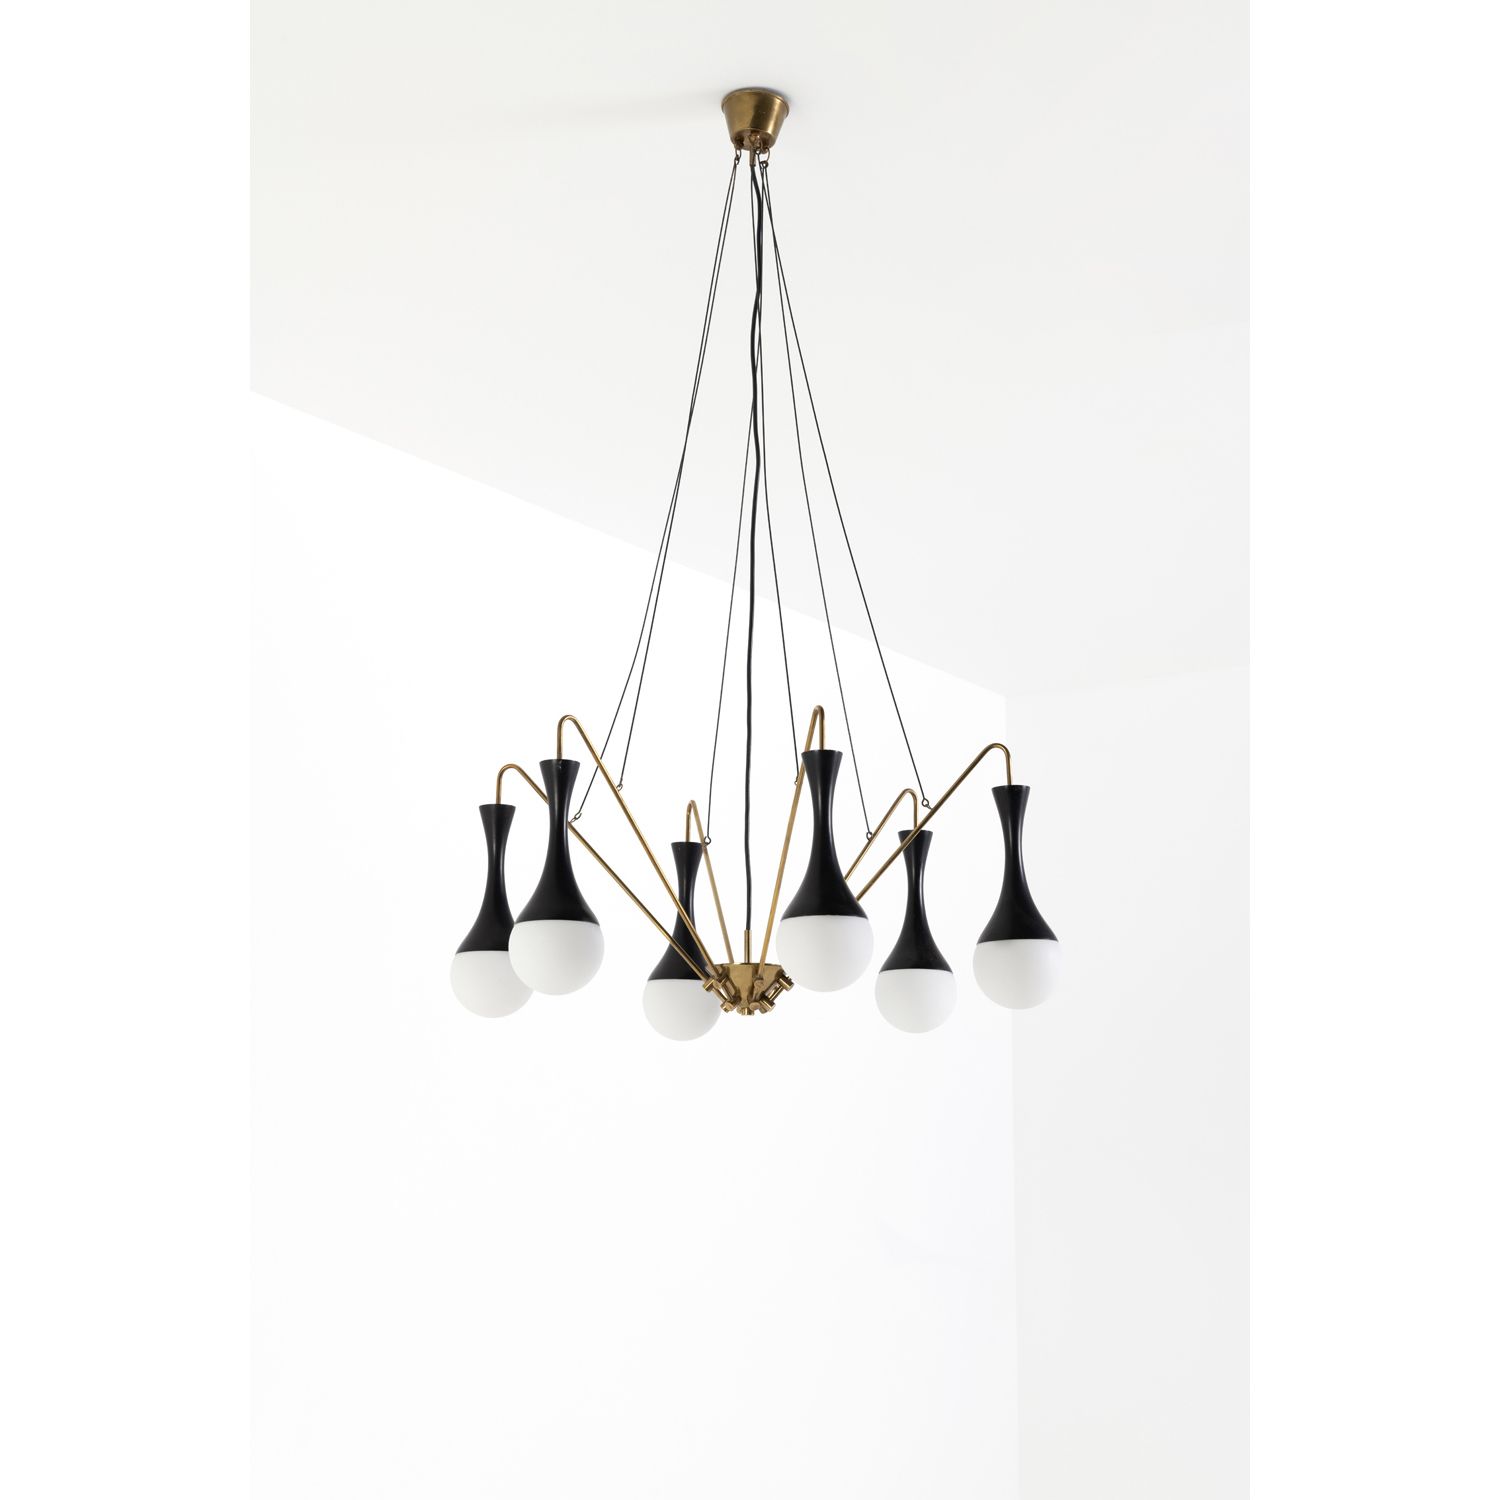 Null Stilnovo (20th c.)

Suspension

Lacquered metal, brass and opaque glass

Ed&hellip;